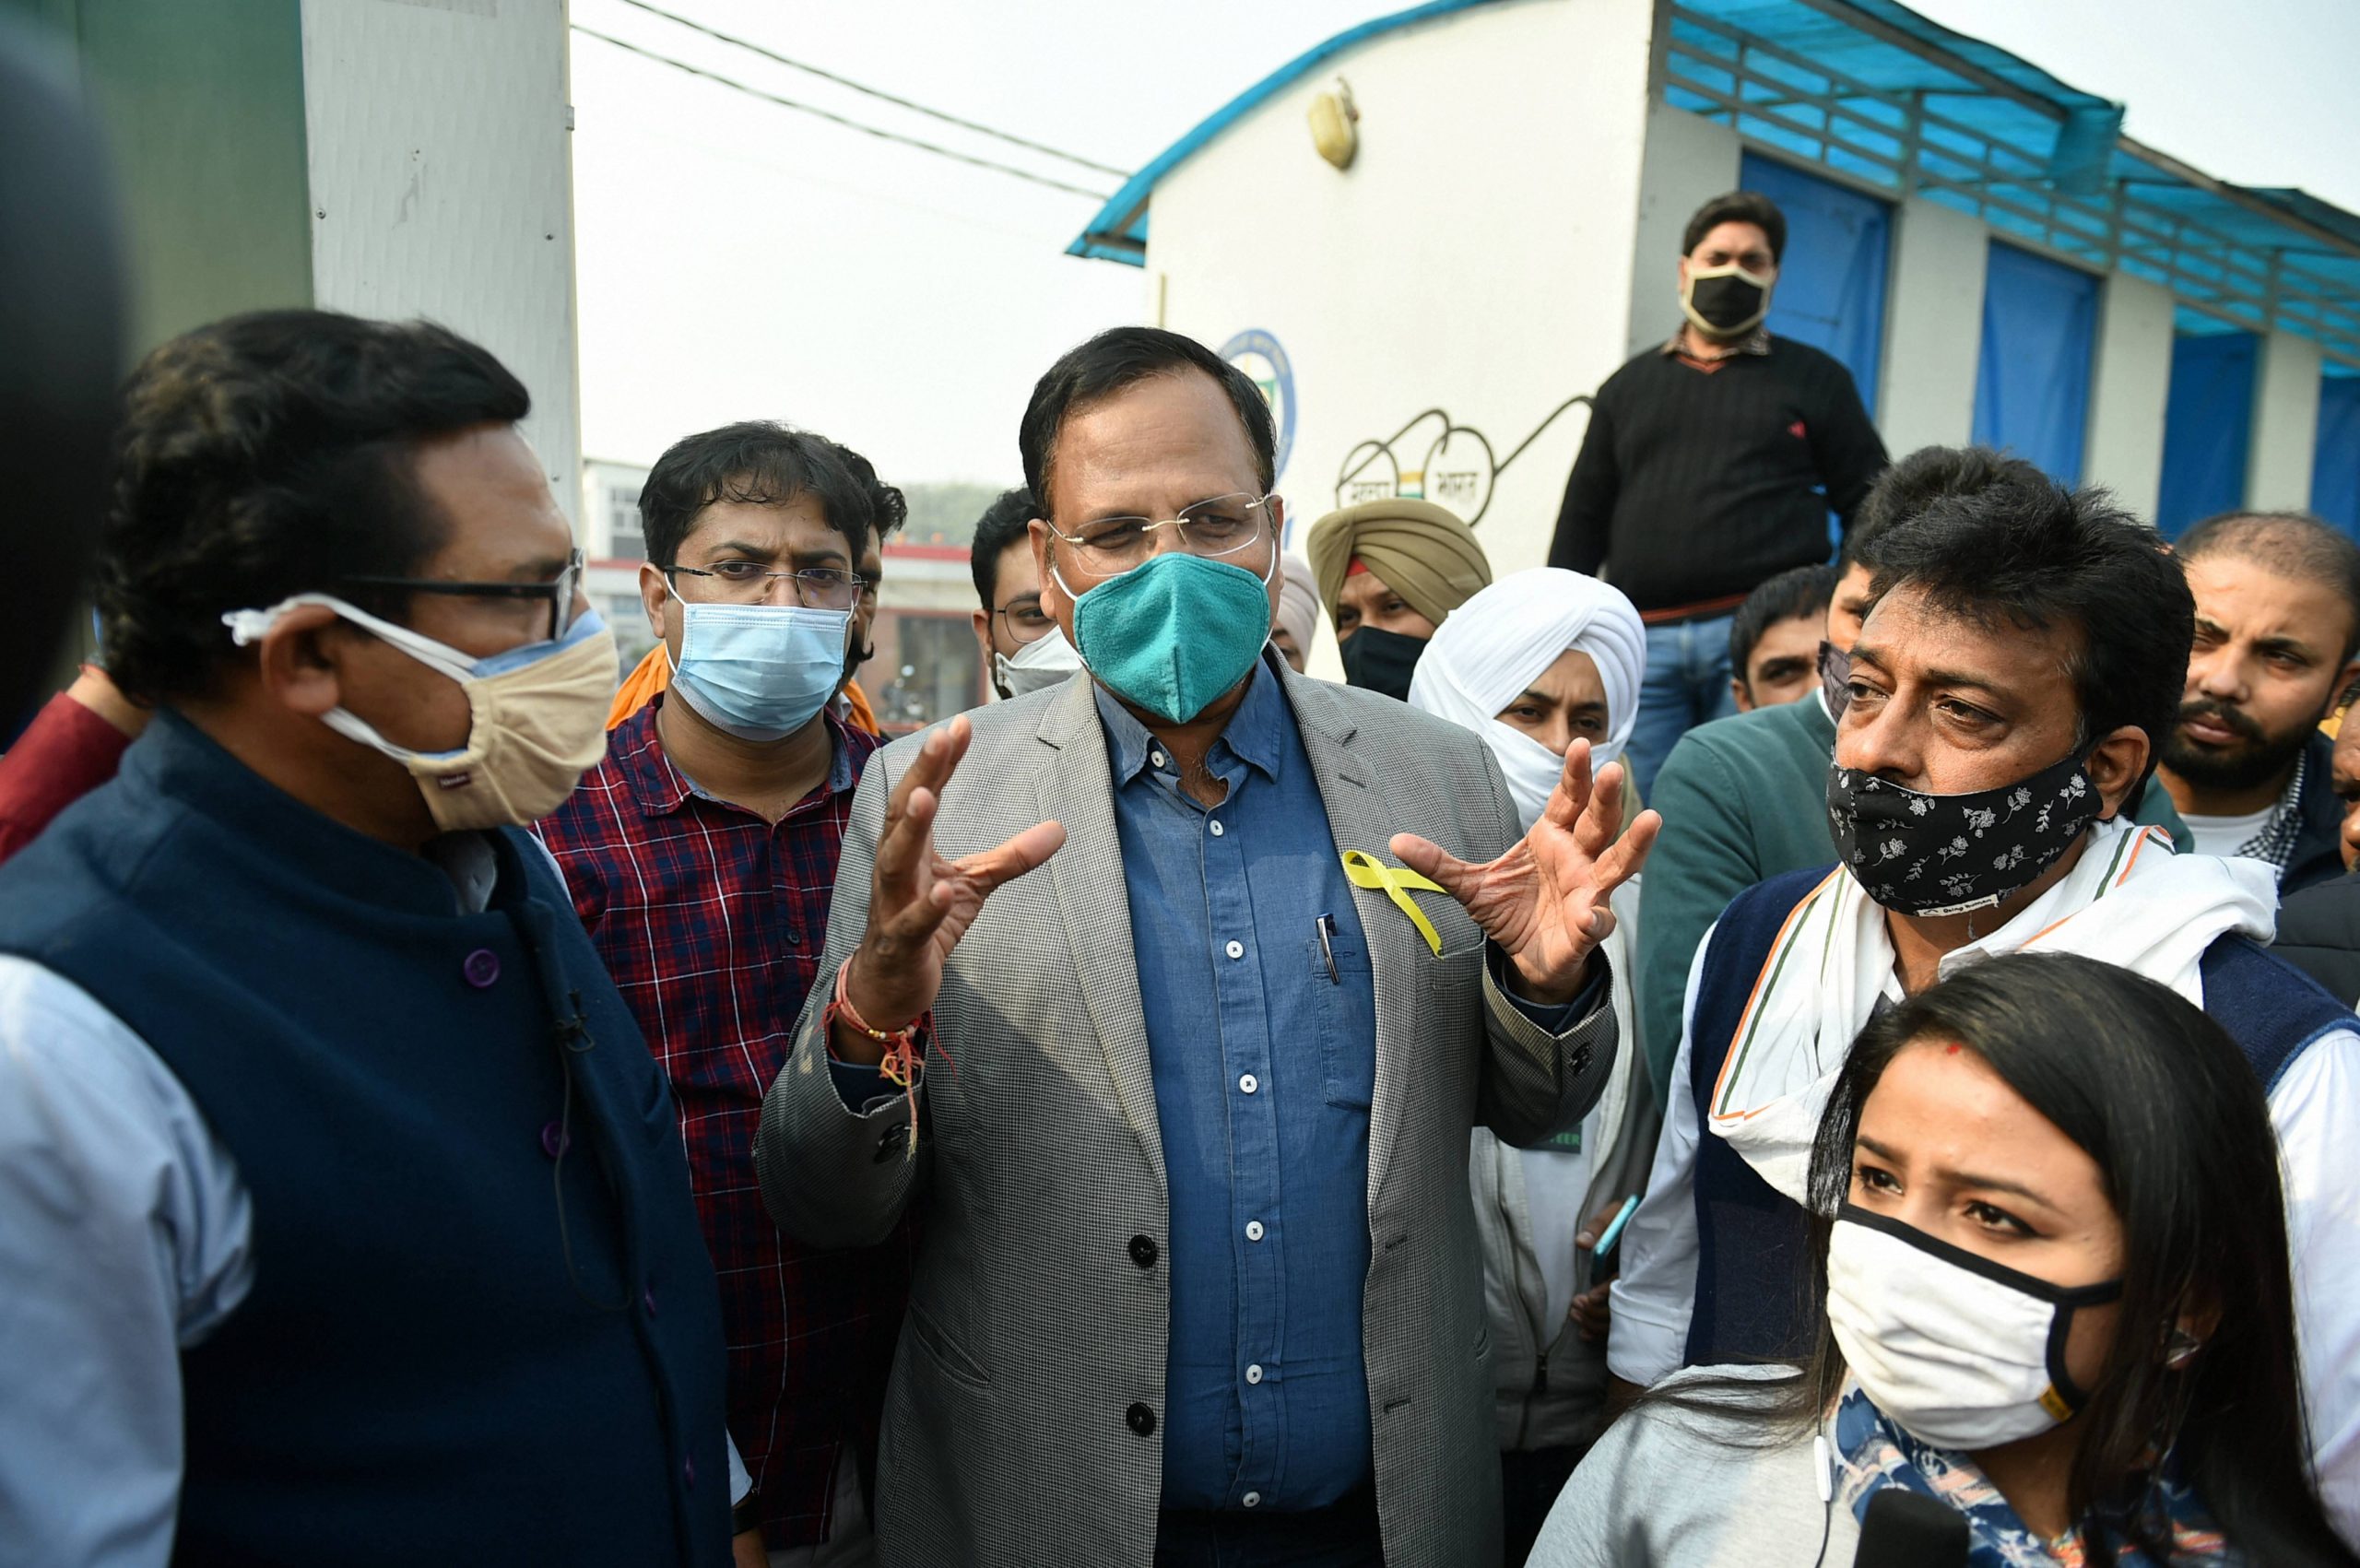 89 centres approved in Delhi to conduct COVID-19 vaccination drive: Health Minister Jain